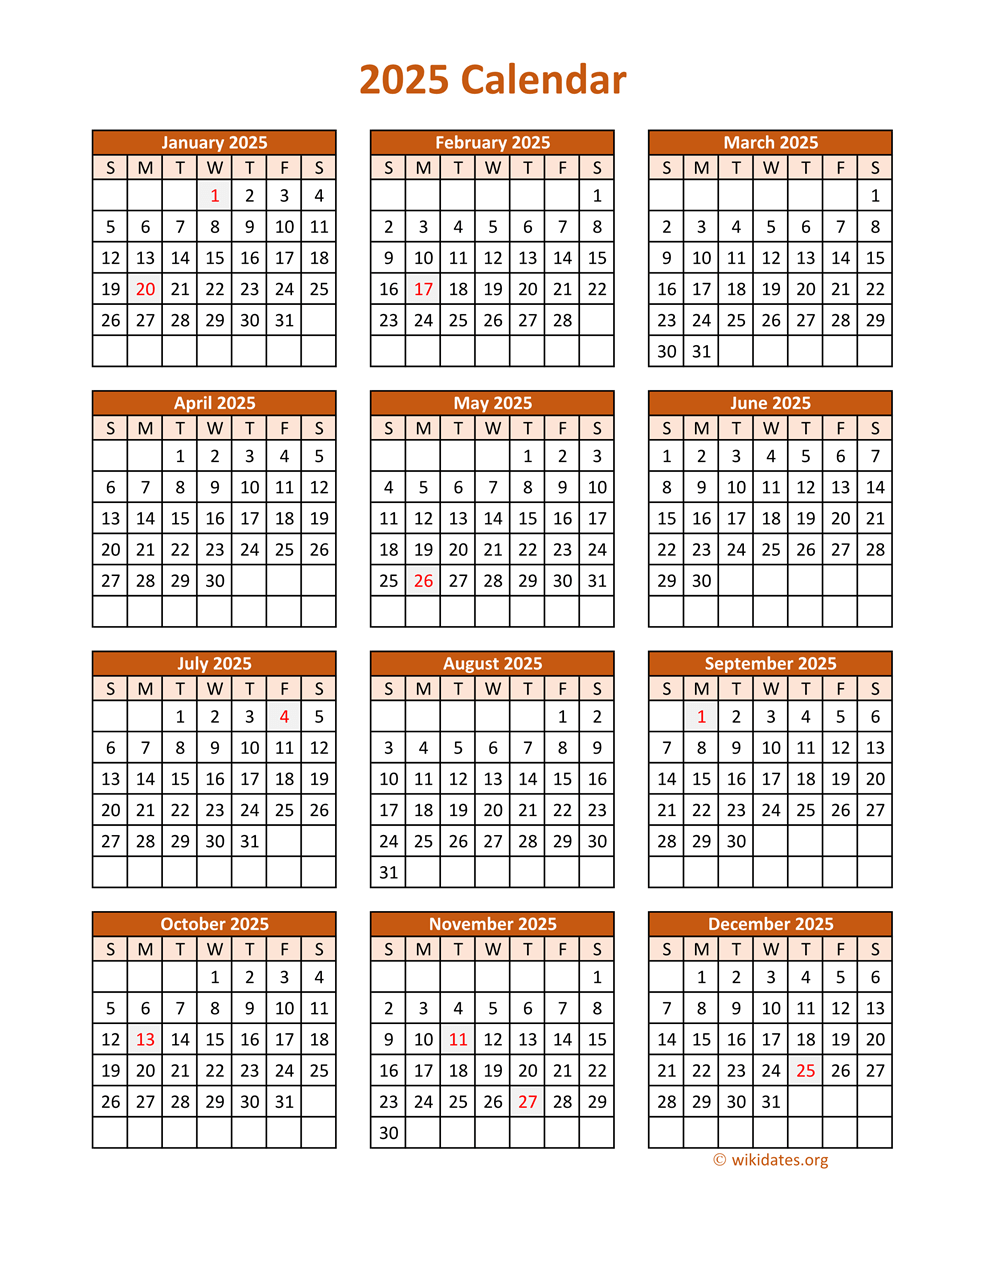 full-year-2025-calendar-on-one-page-wikidates